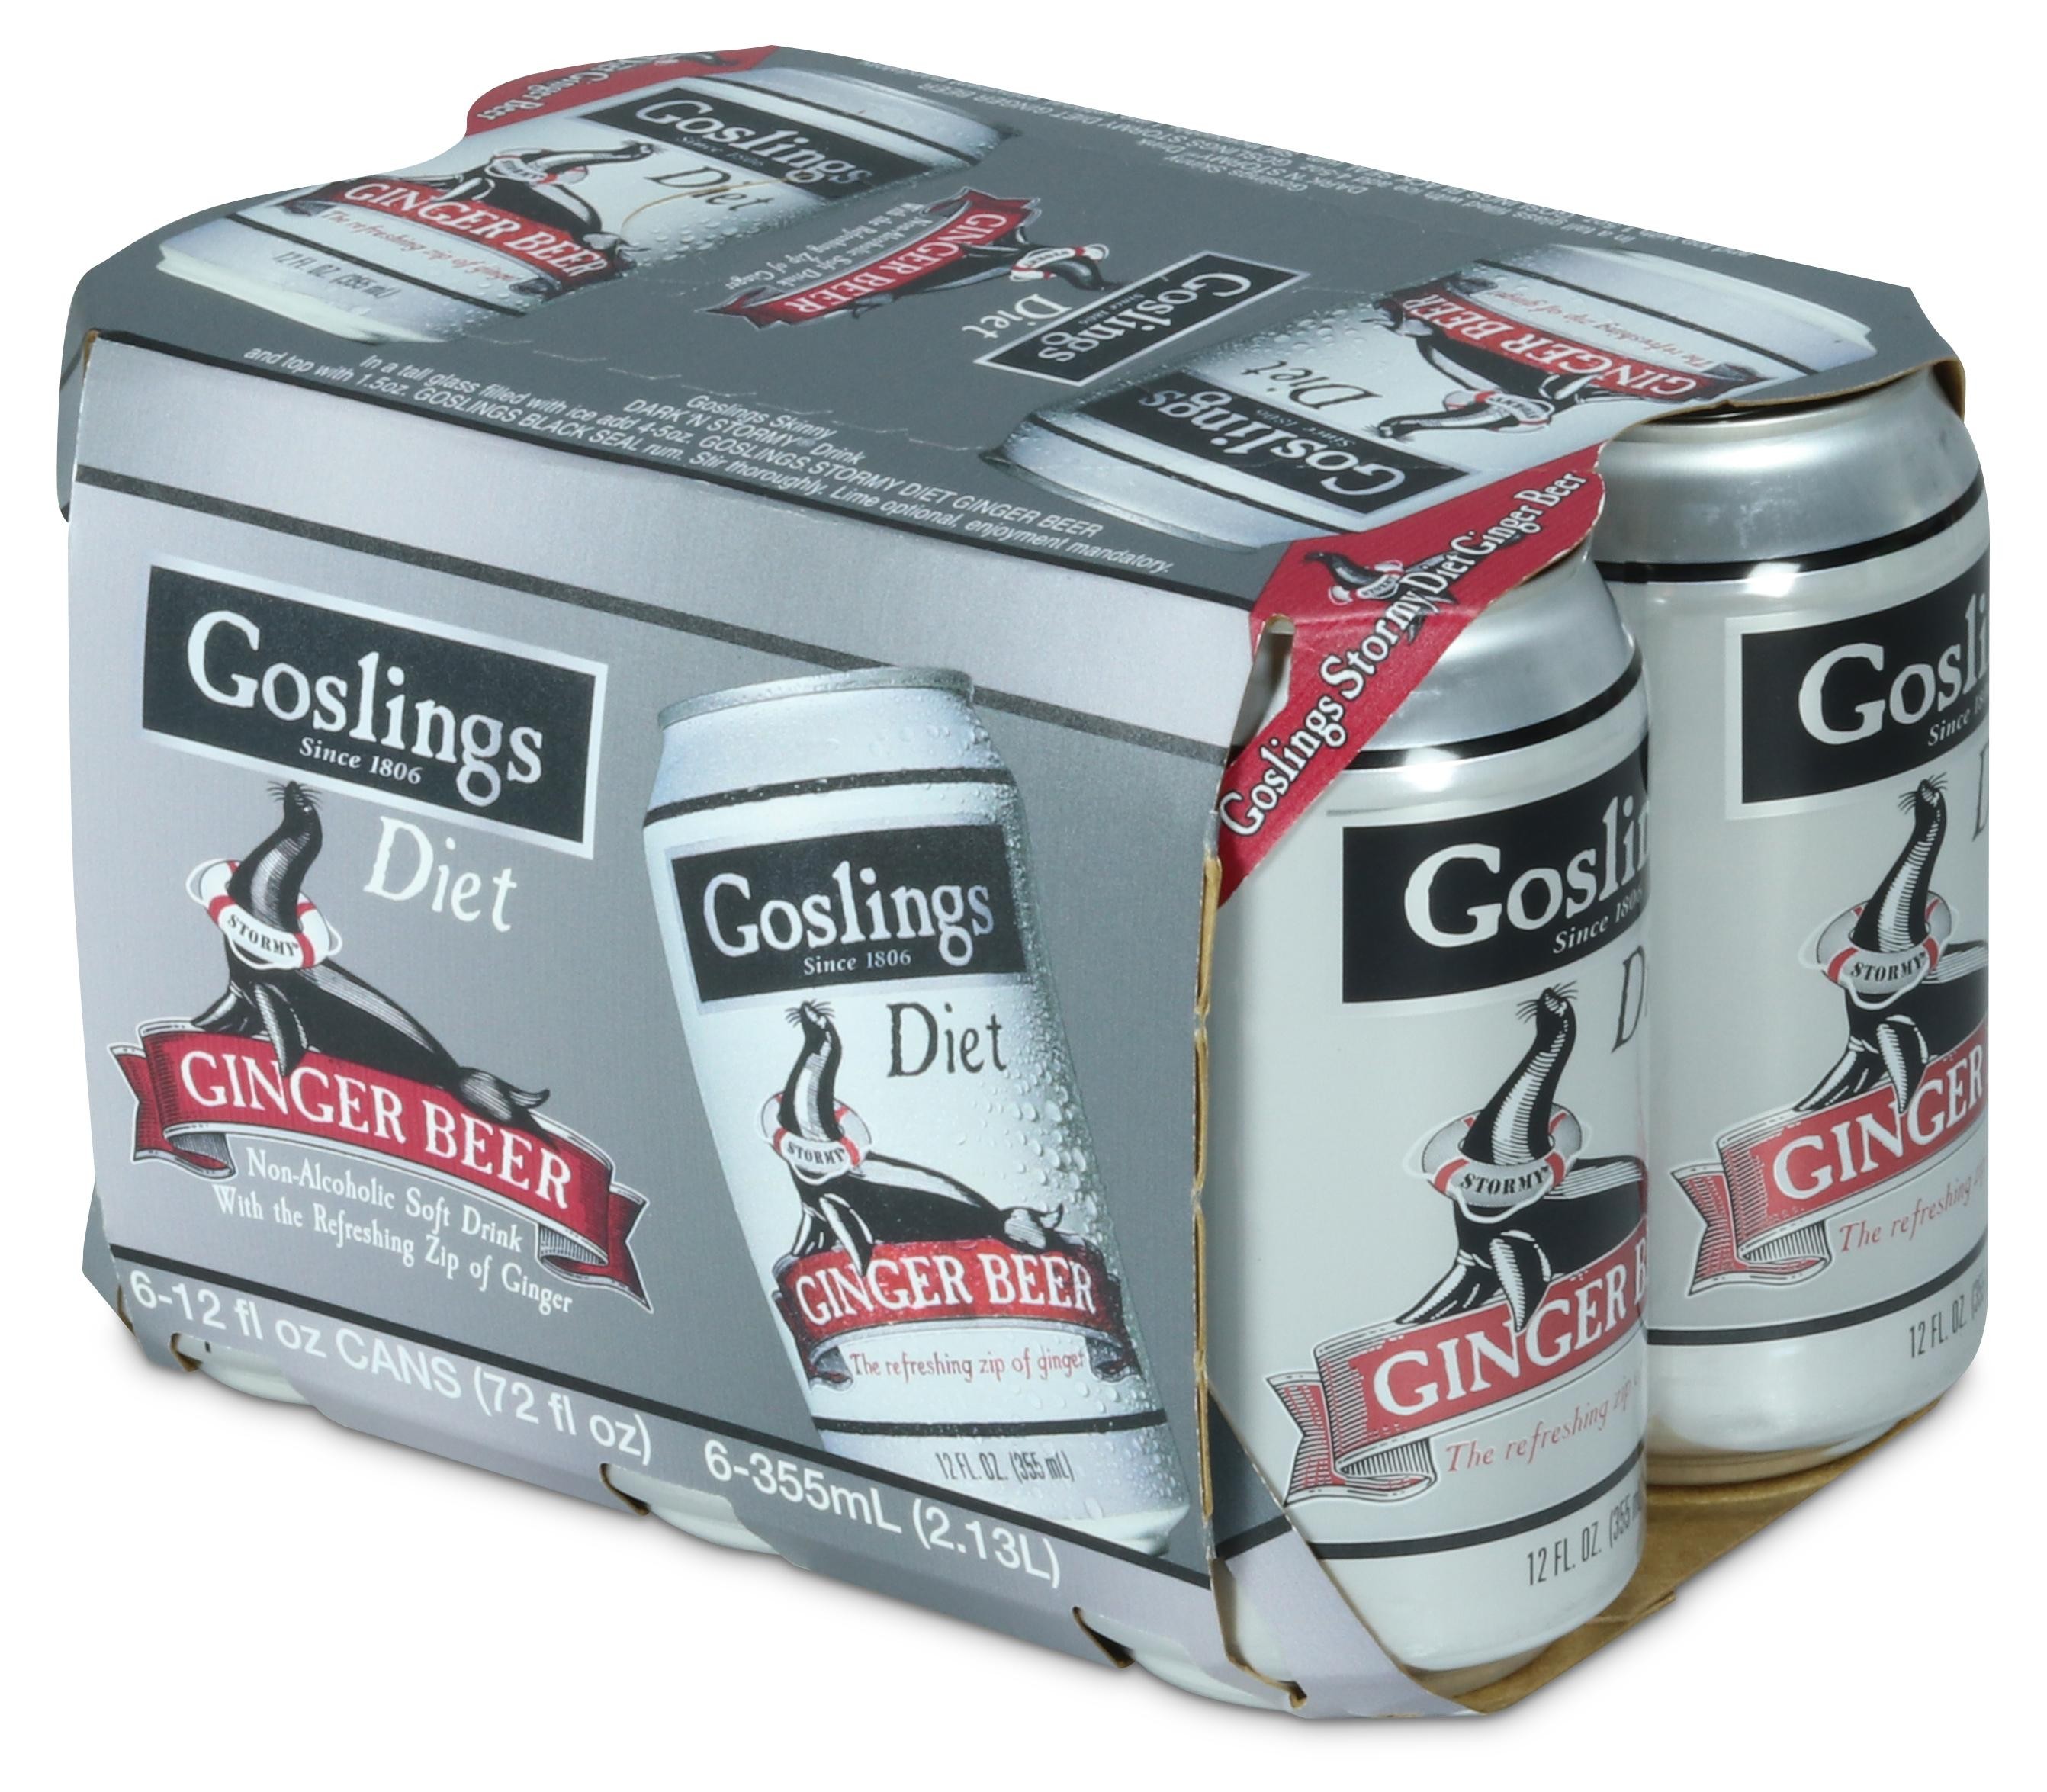 Goslings Diet Ginger Beer Cans 6pk can